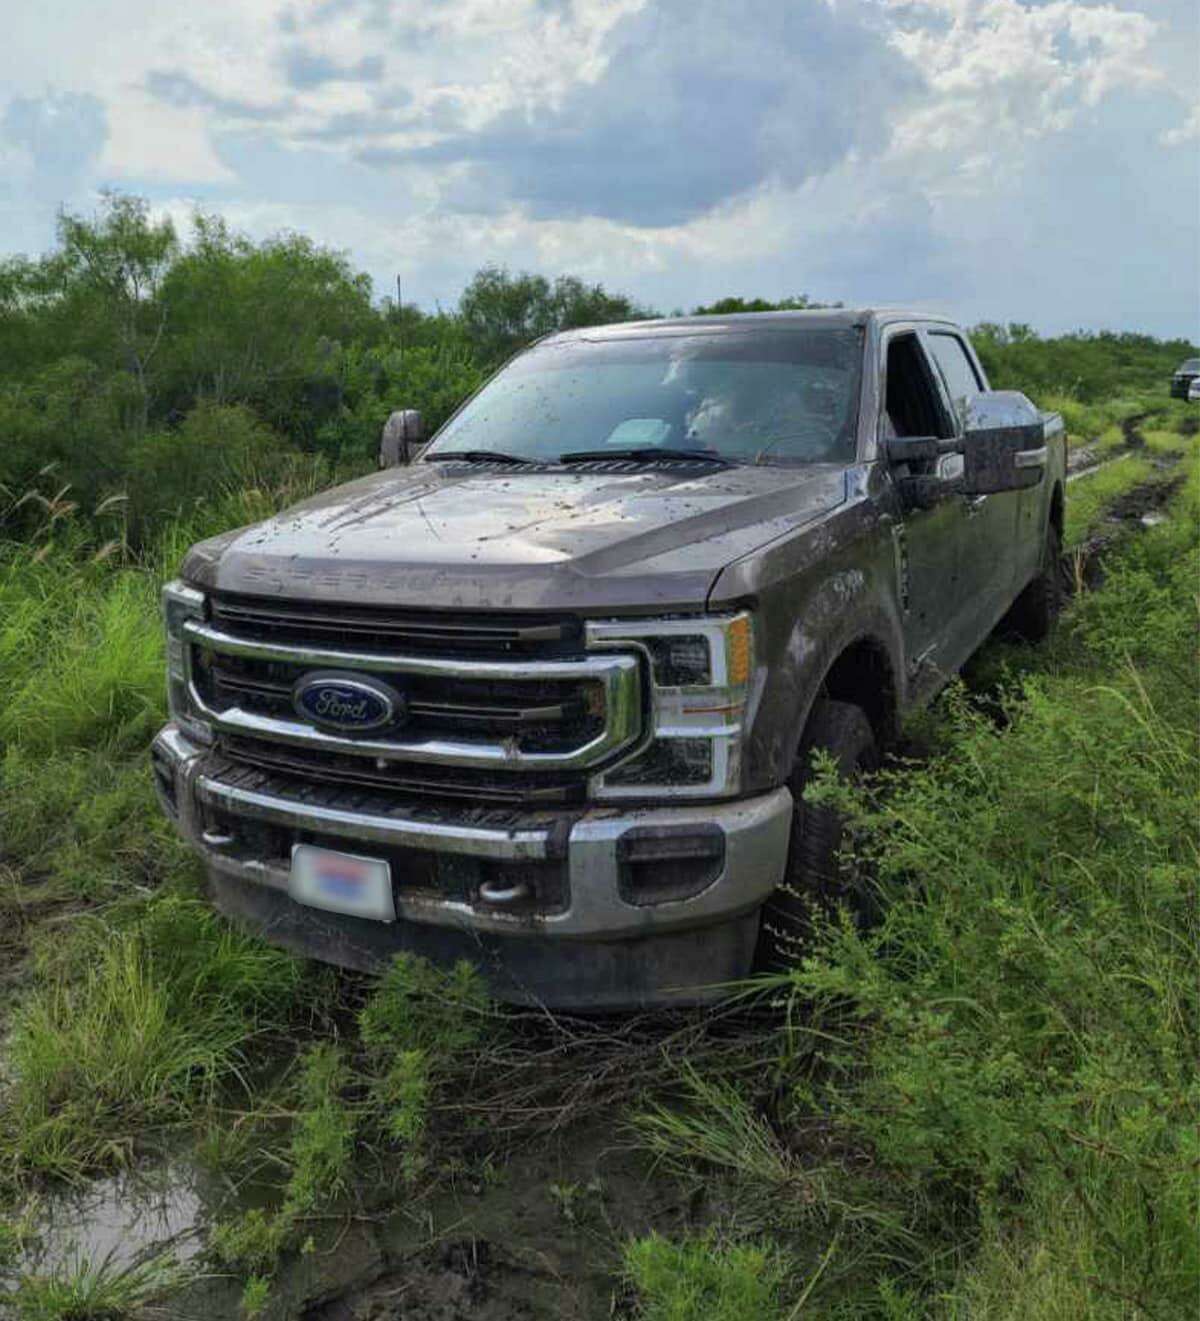 A truck reported stolen in San Antonio was found stuck after traveling through a Freer ranch.